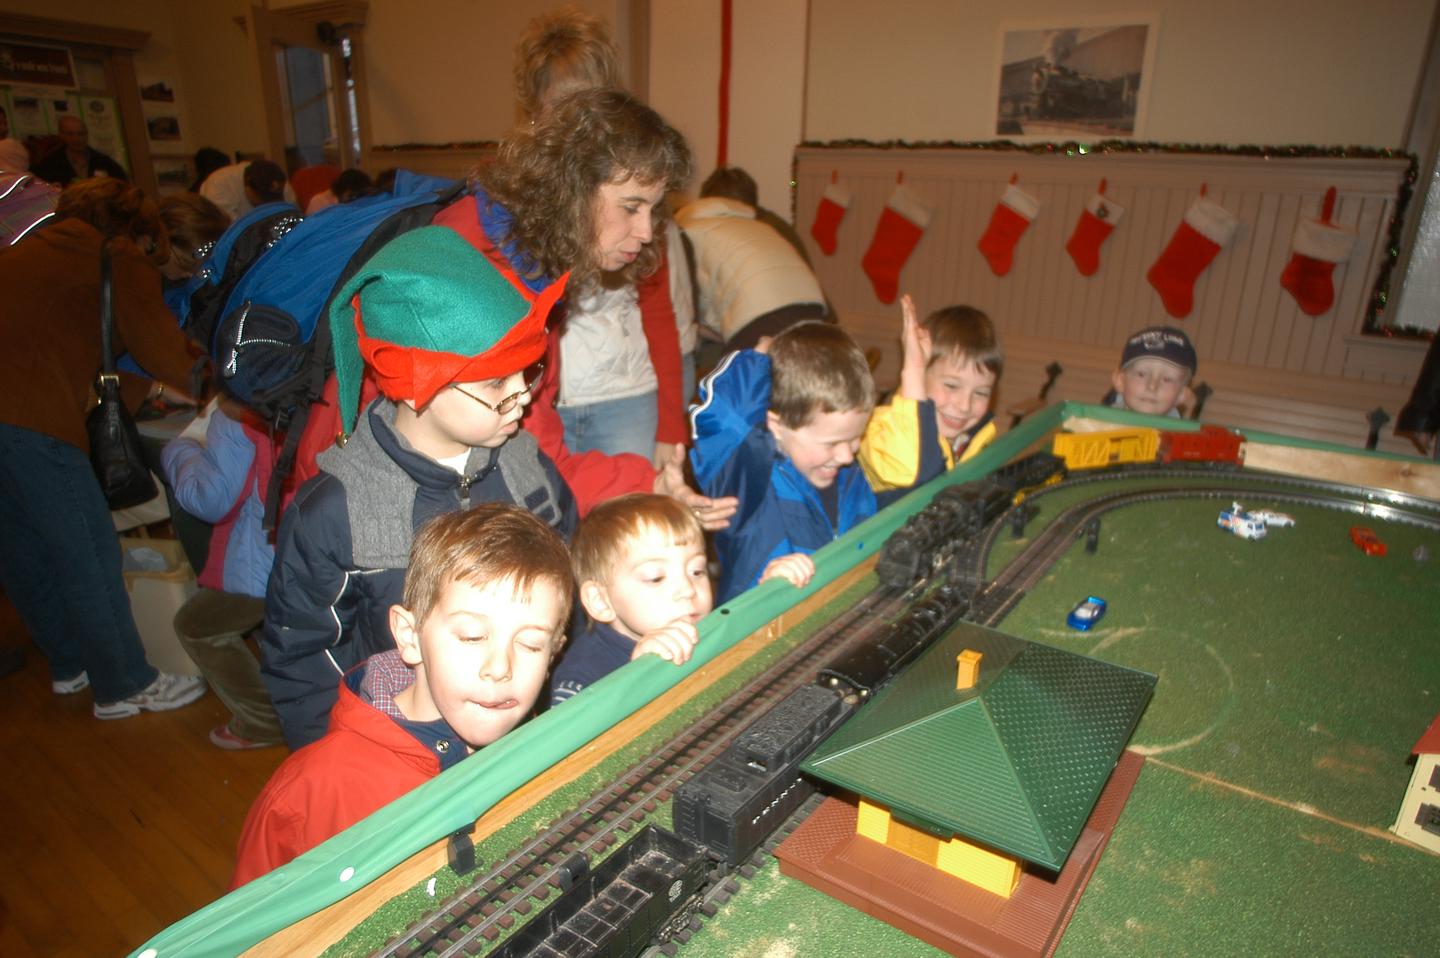 6 young visitors and 1 adult observe a model trainVisitors to Moscow Station for the "Holiday Express" can enjoy model train displays in addition to holiday activities.